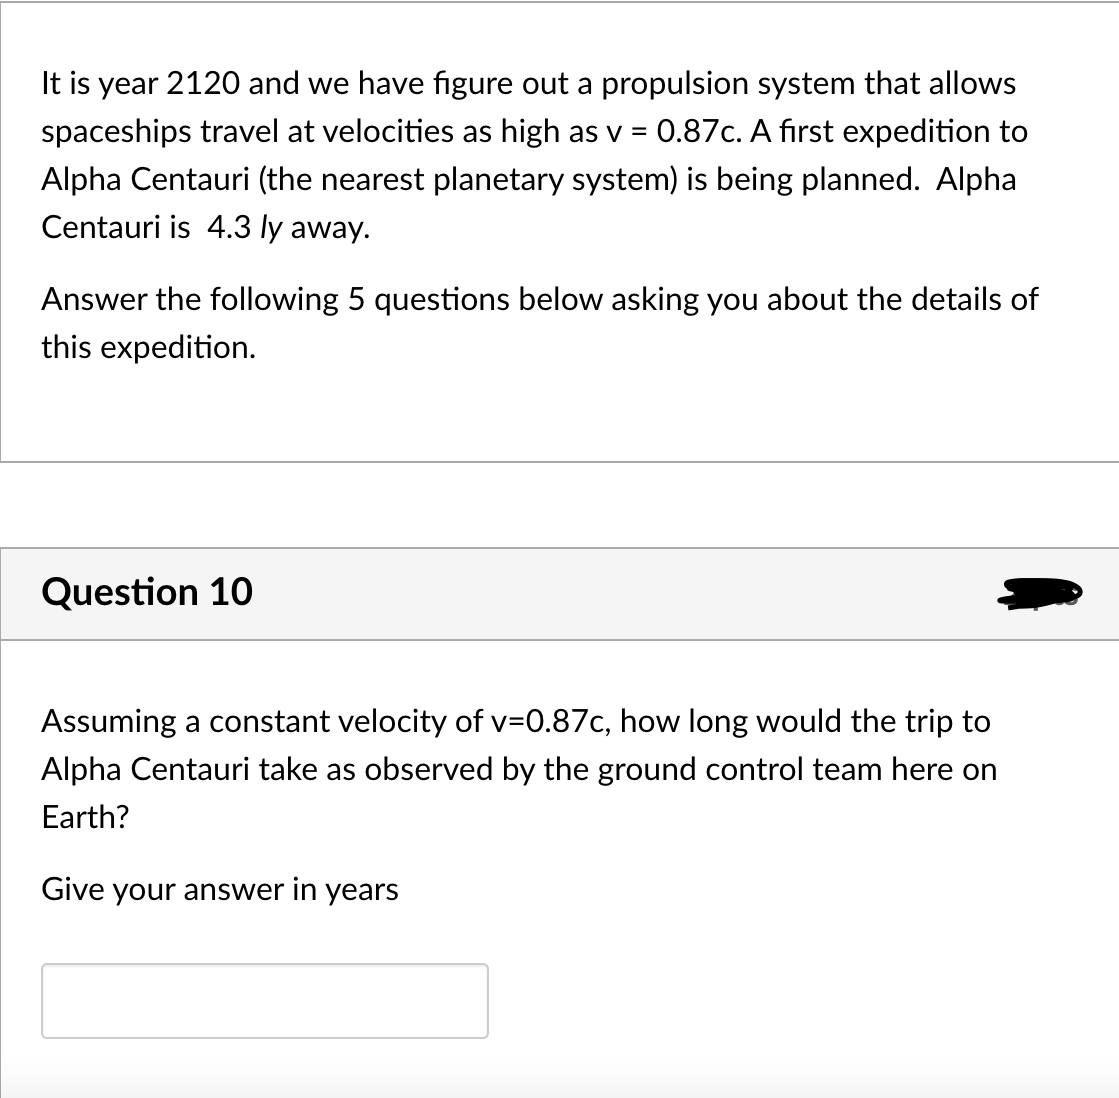 It is year 2120 and we have figure out a propulsion system that allows
spaceships travel at velocities as high as v = 0.87c. A first expedition to
Alpha Centauri (the nearest planetary system) is being planned. Alpha
Centauri is 4.3 ly away.
Answer the following 5 questions below asking you about the details of
this expedition.
Question 10
Assuming a constant velocity of v=0.87c, how long would the trip to
Alpha Centauri take as observed by the ground control team here on
Earth?
Give your answer in years
